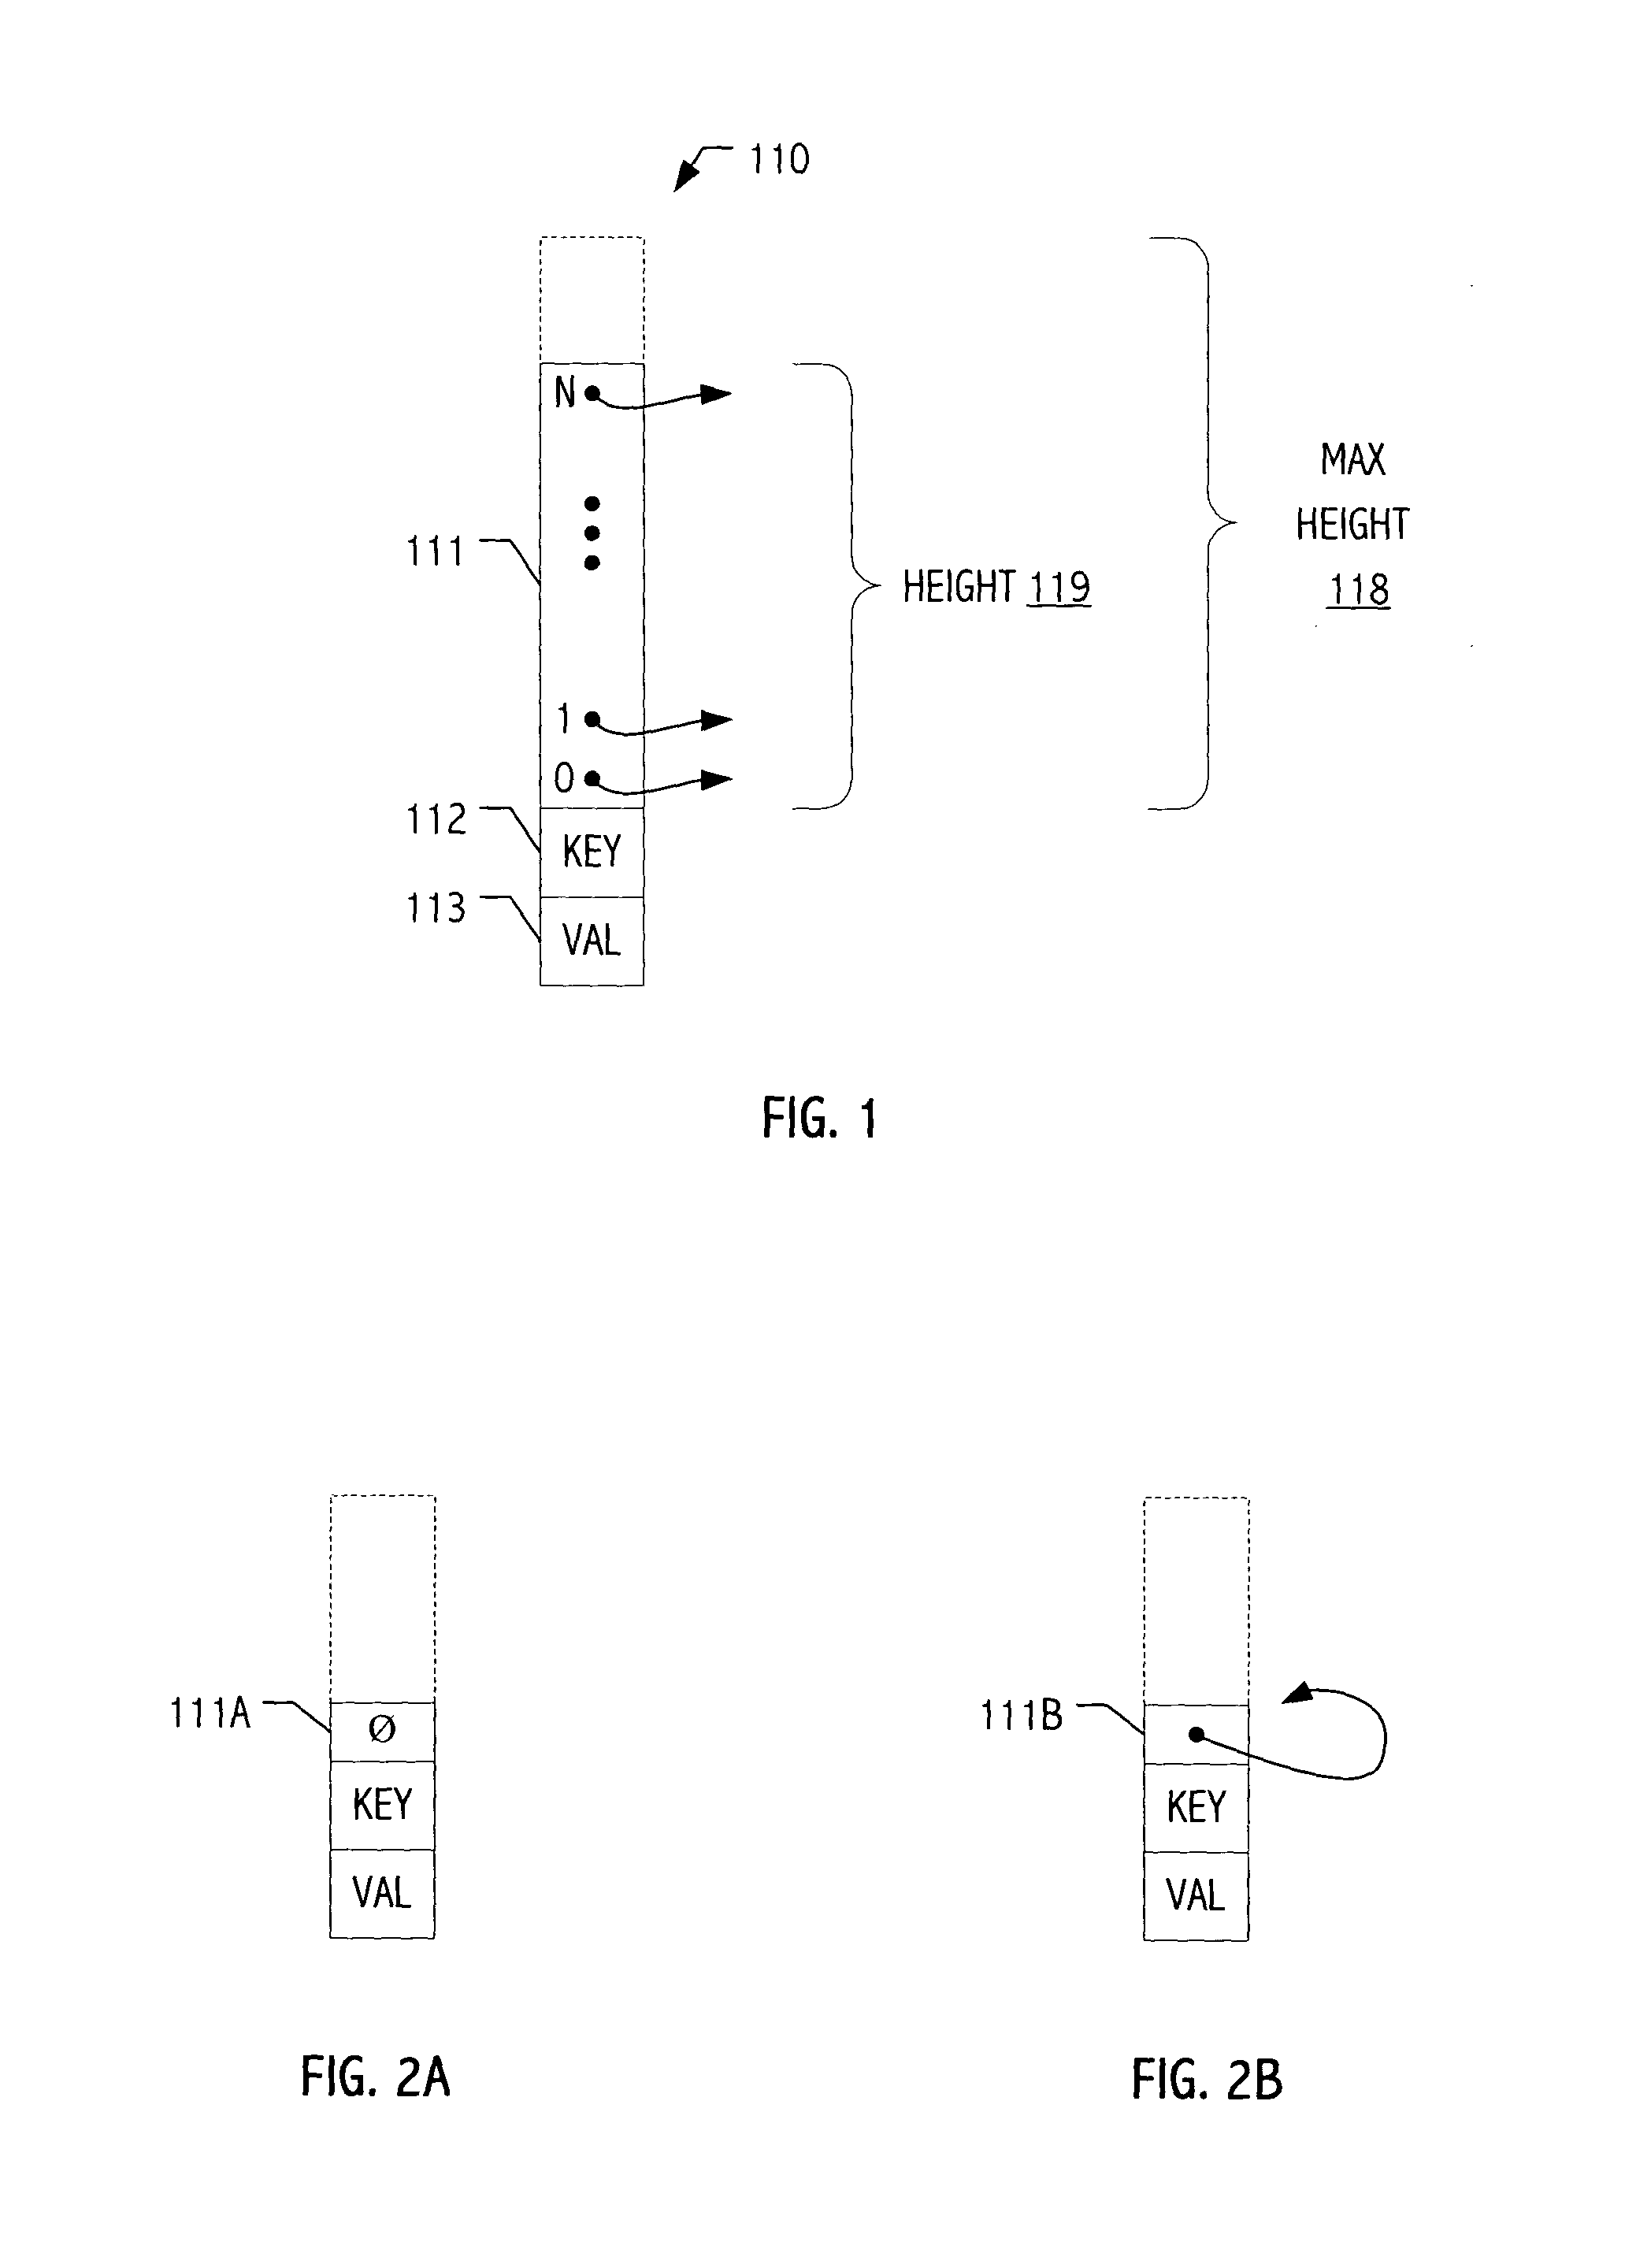 Shared synchronized skip-list data structure and technique employing linearizable operations